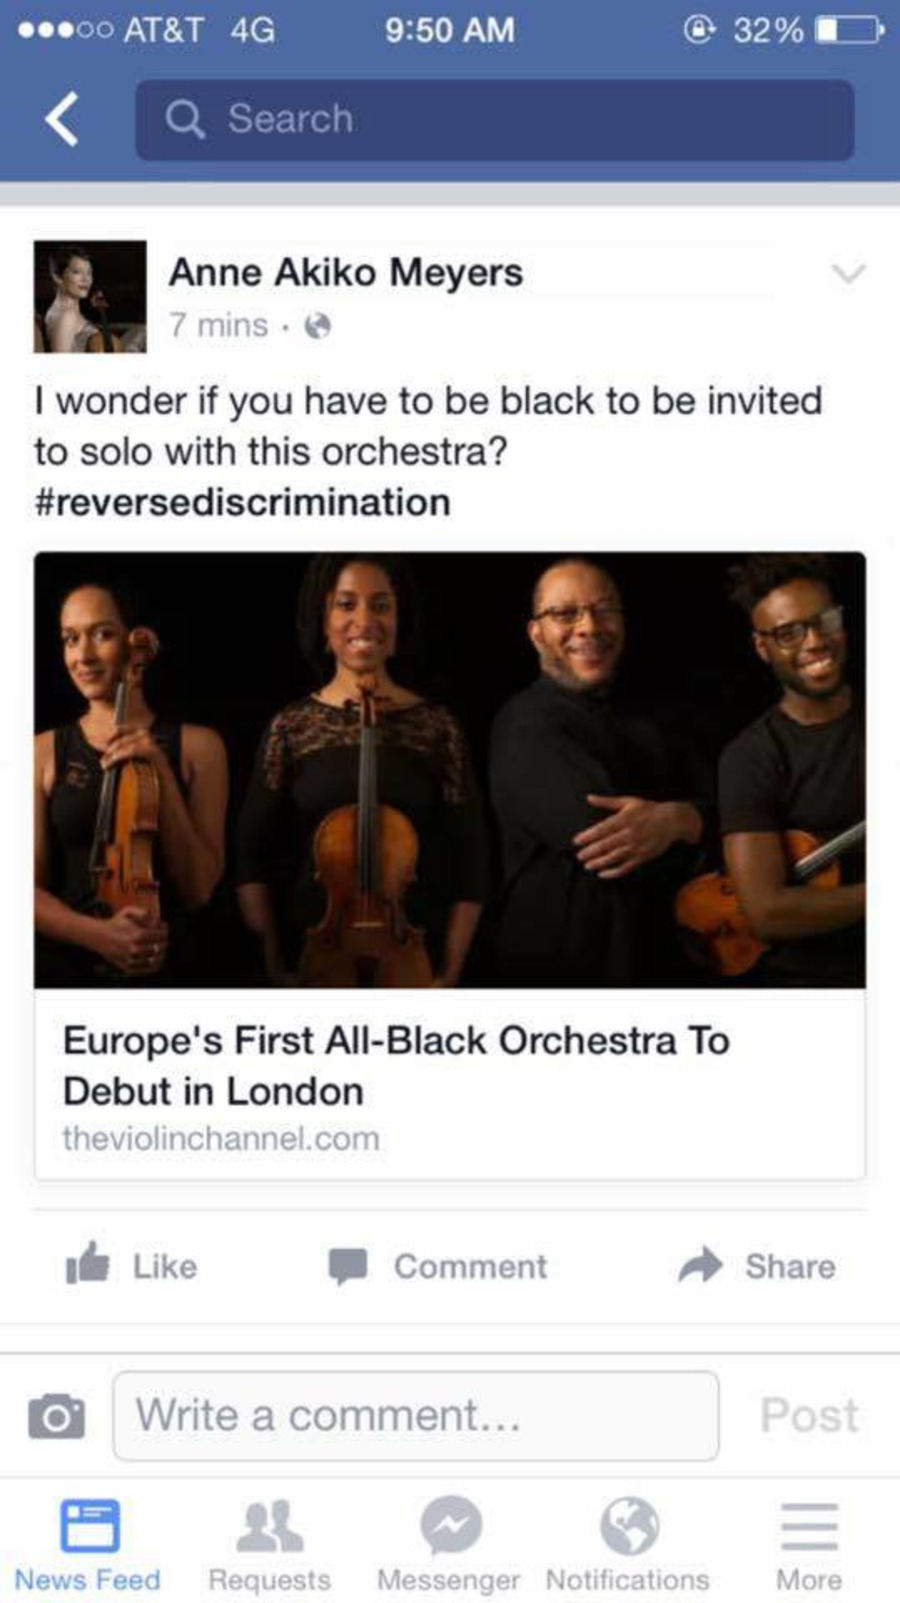 the text reads: I wonder if you have to be black to solo with this orchestra? #reversediscrimination